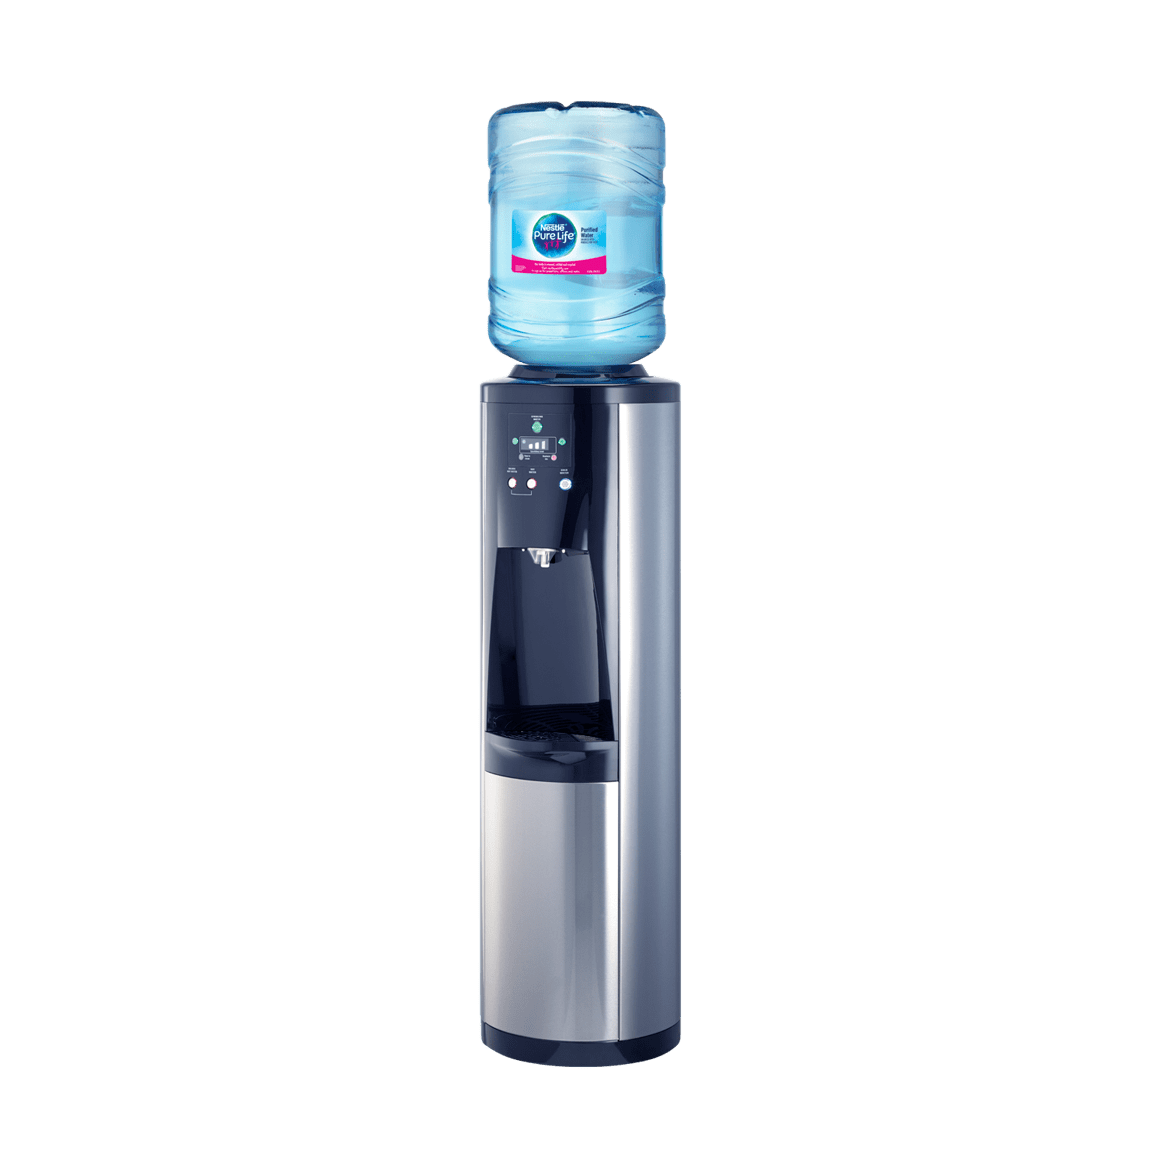 The Cascade Profile Gray Charcoal Water Dispenser